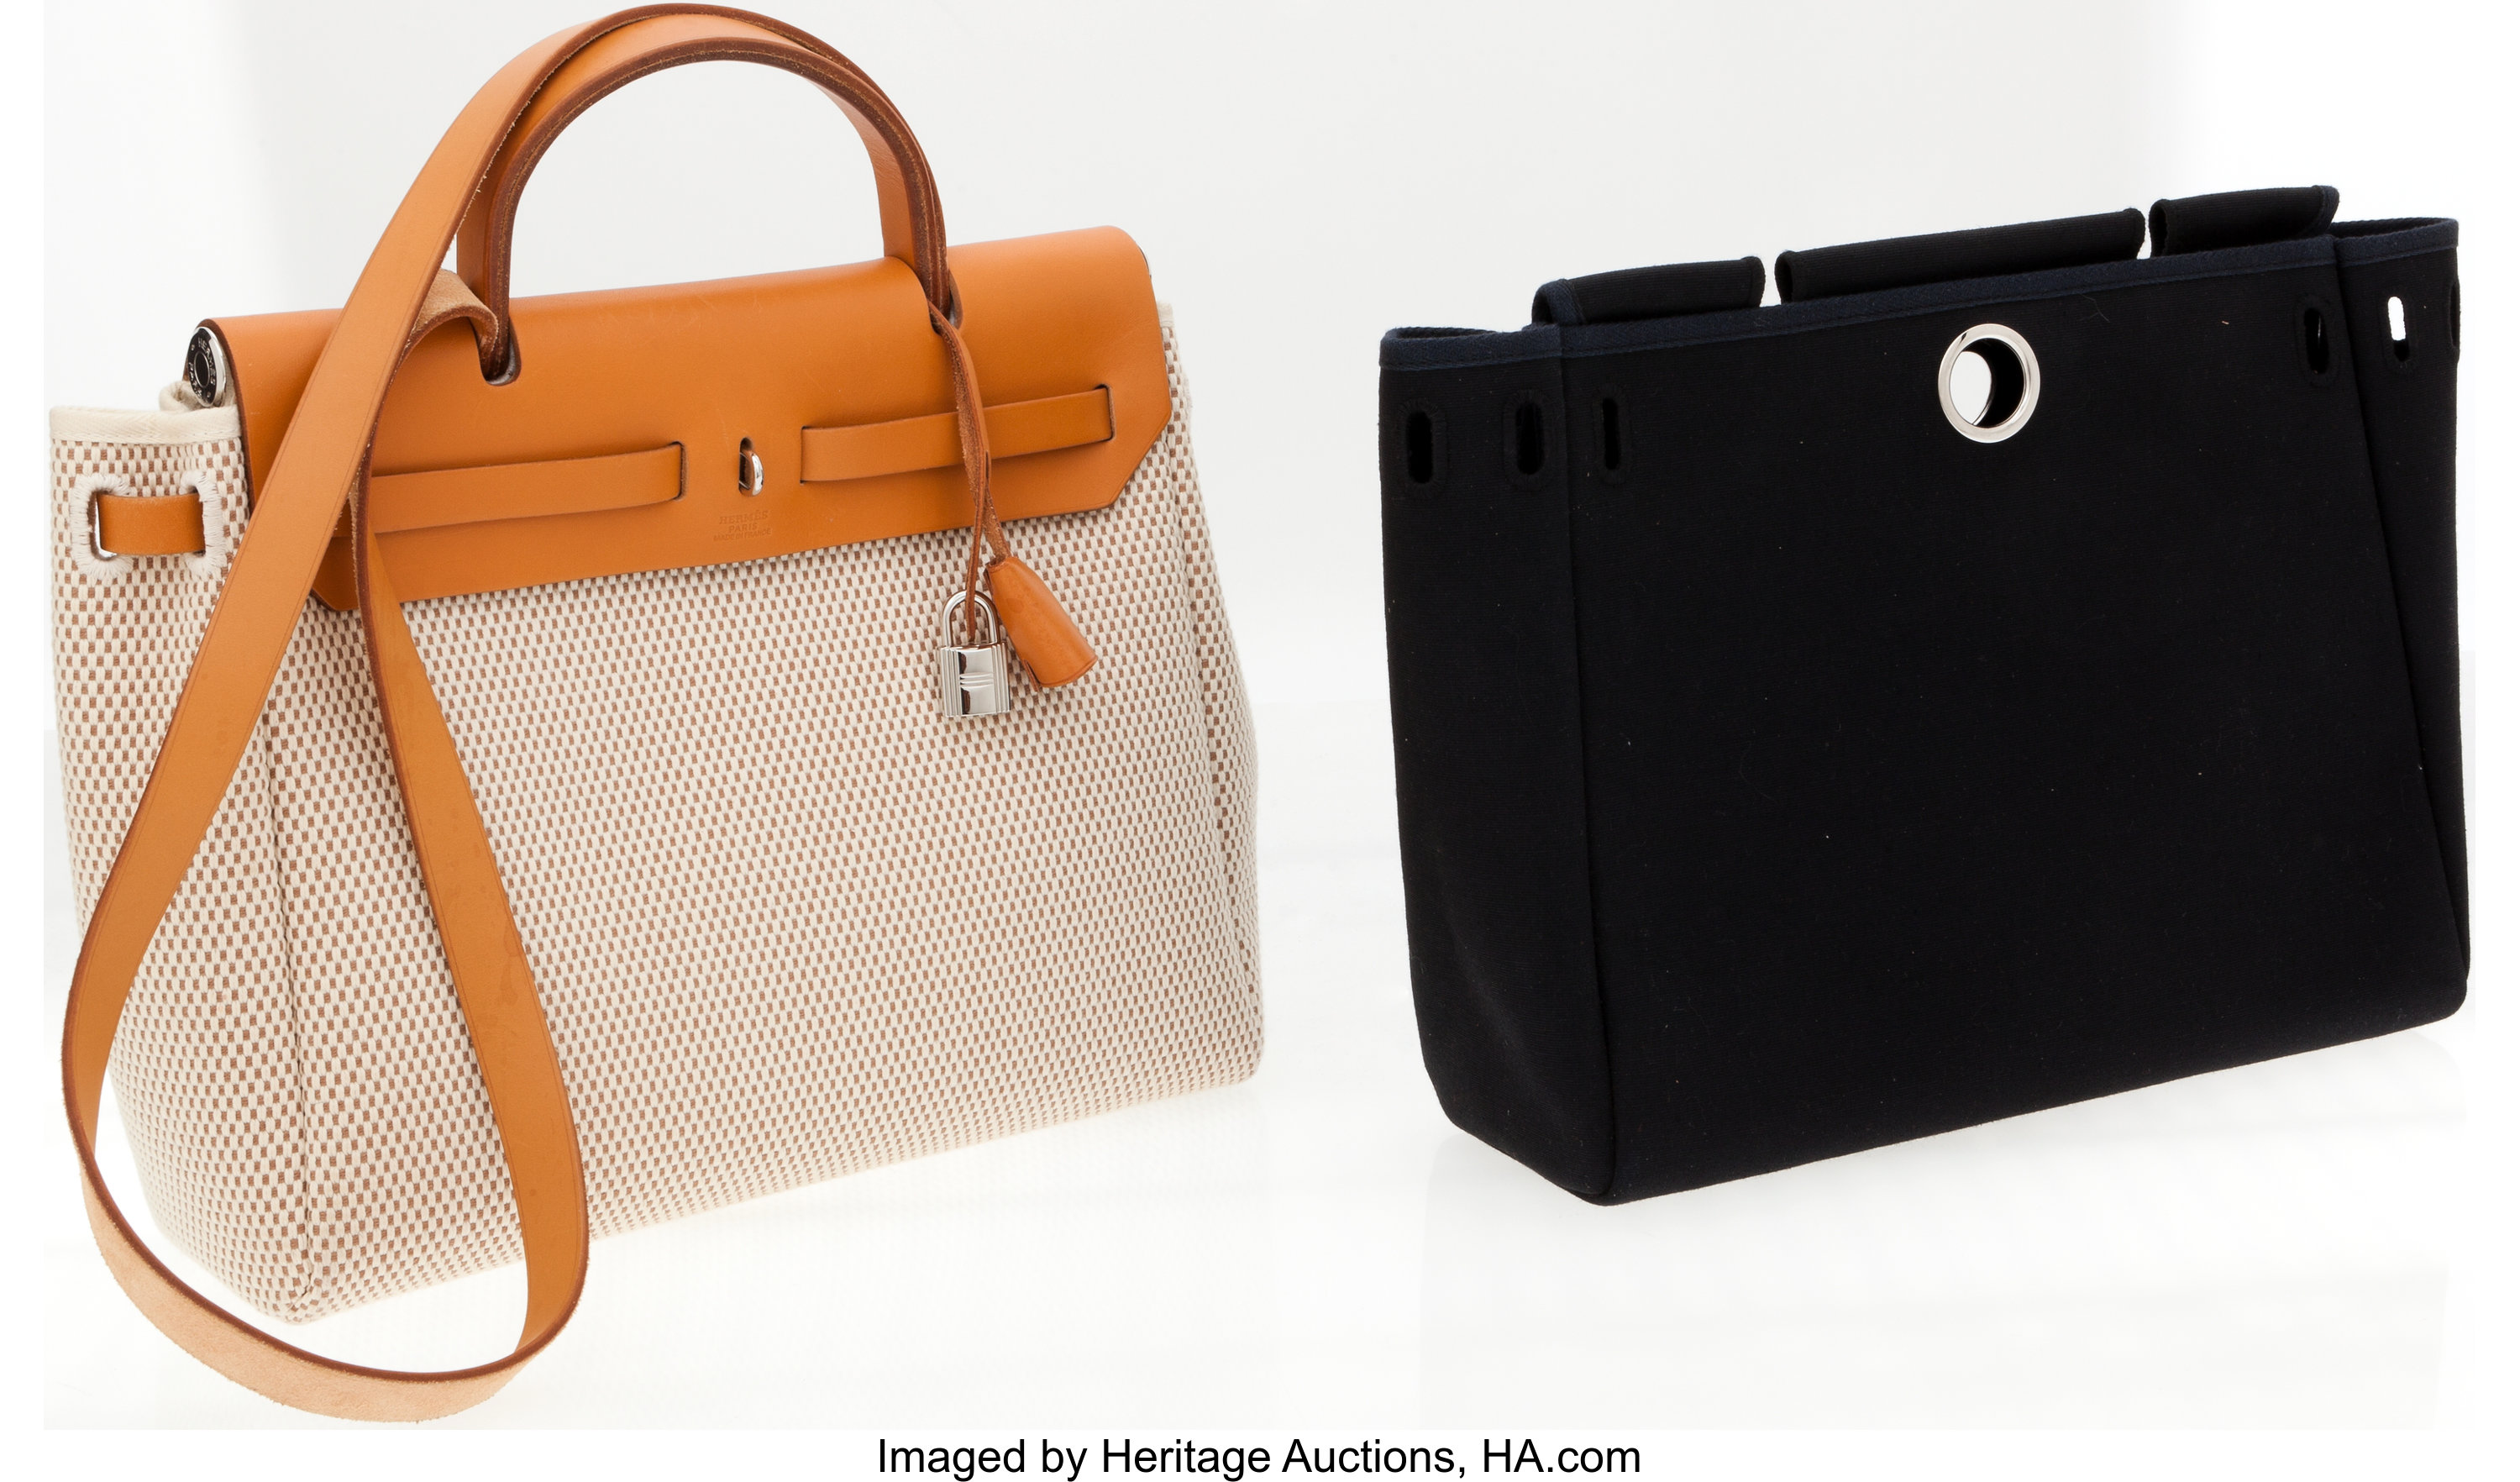 Growing Popularity of the Hermes Herbag: Is This The Bag For Me?